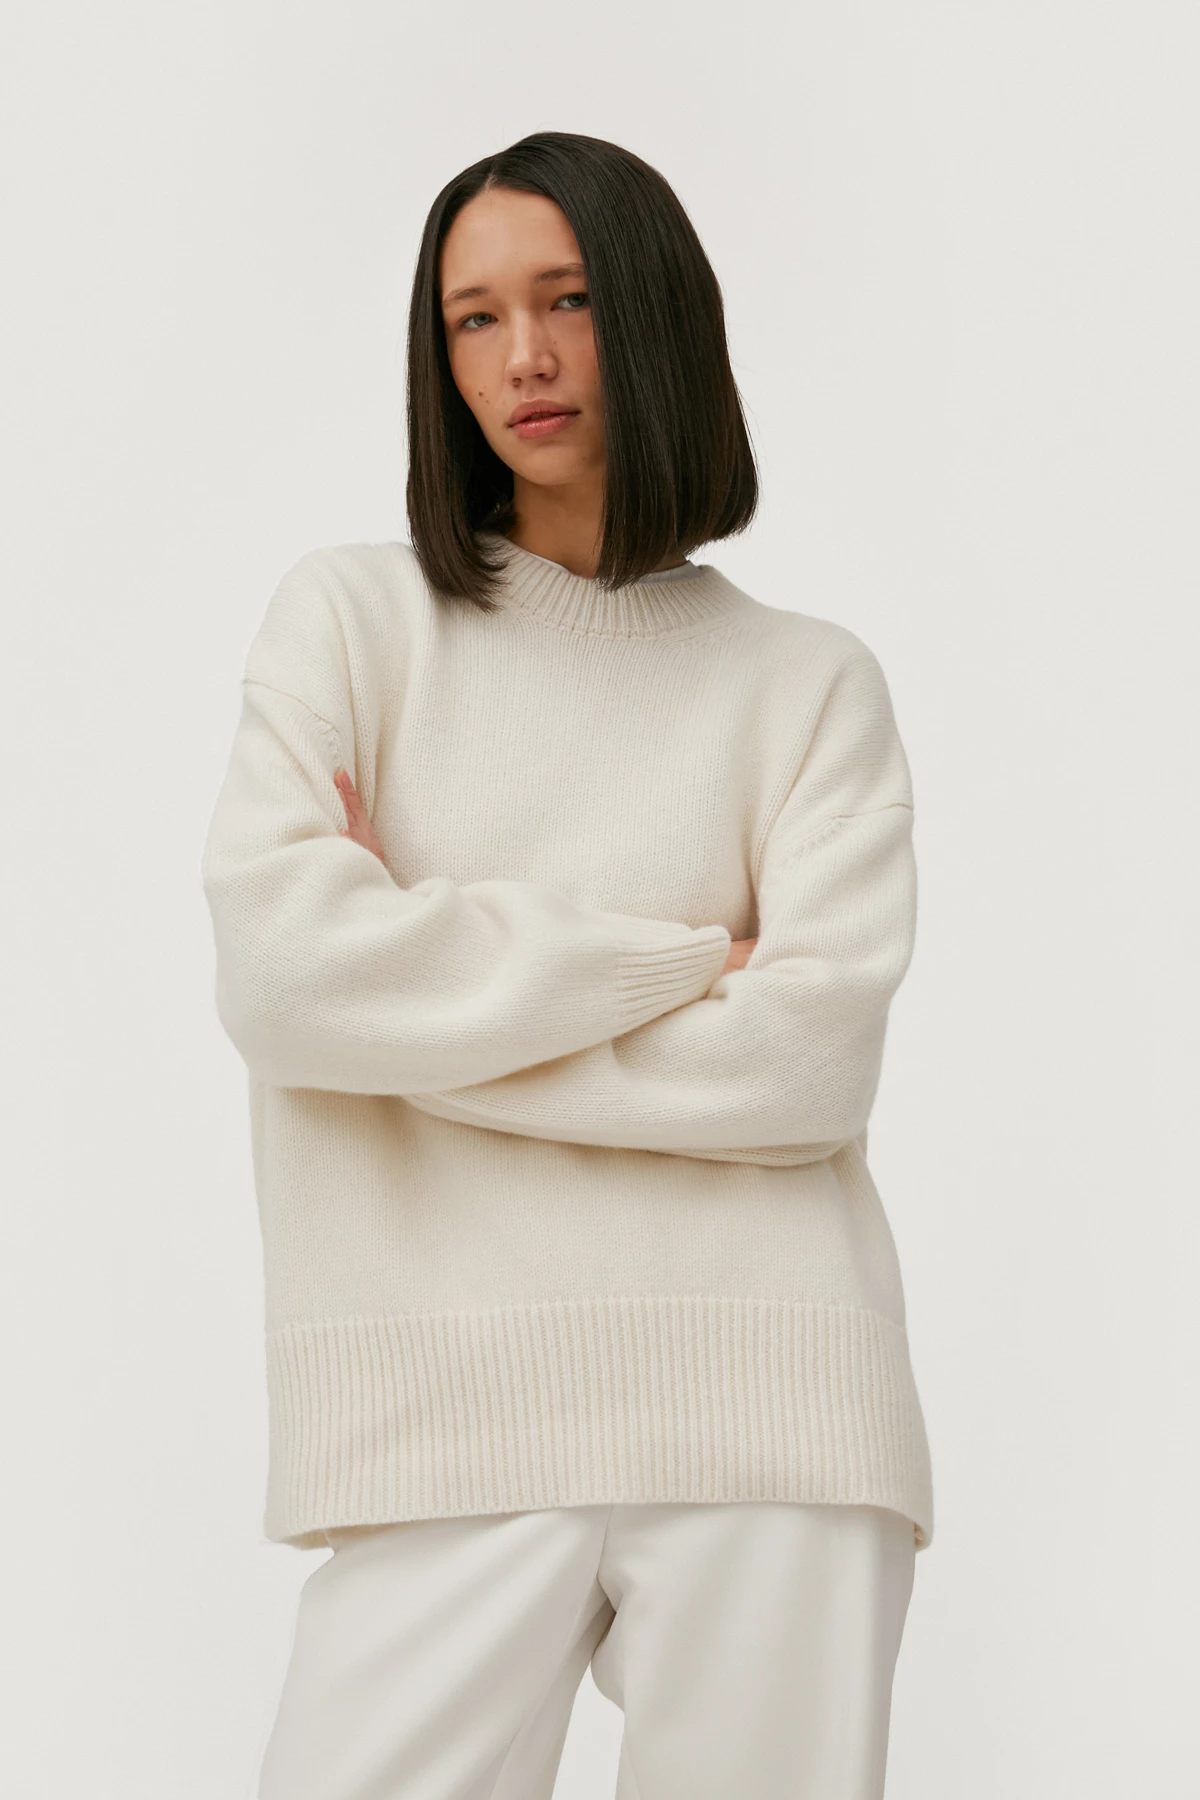 Cashmere milky loose-fit sweater, photo 3